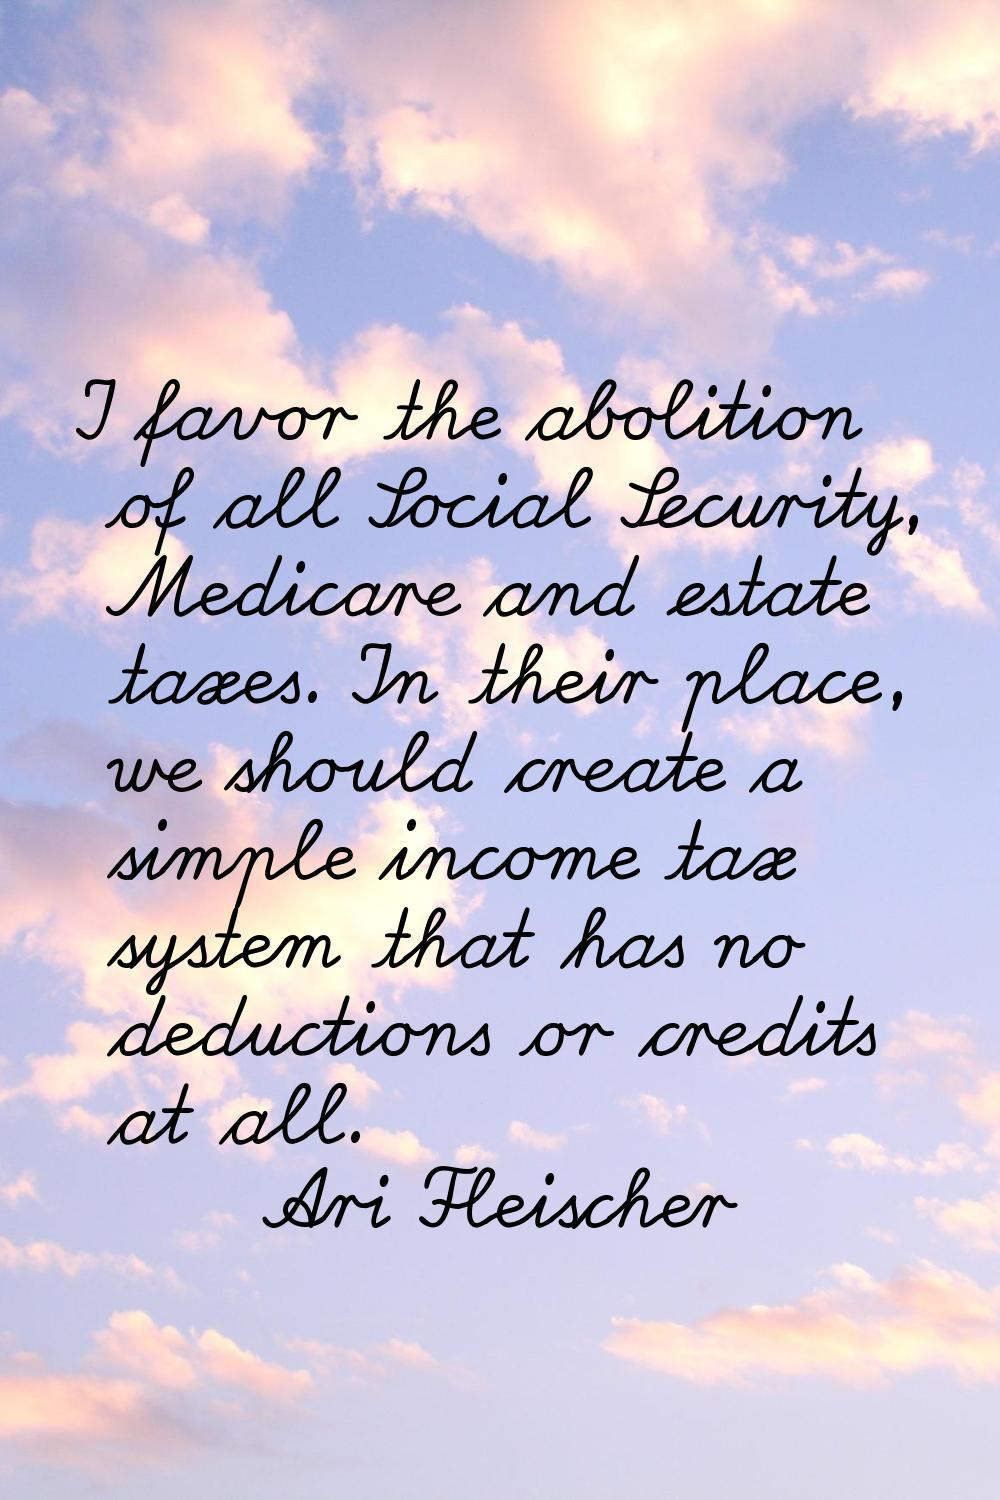 I favor the abolition of all Social Security, Medicare and estate taxes. In their place, we should 